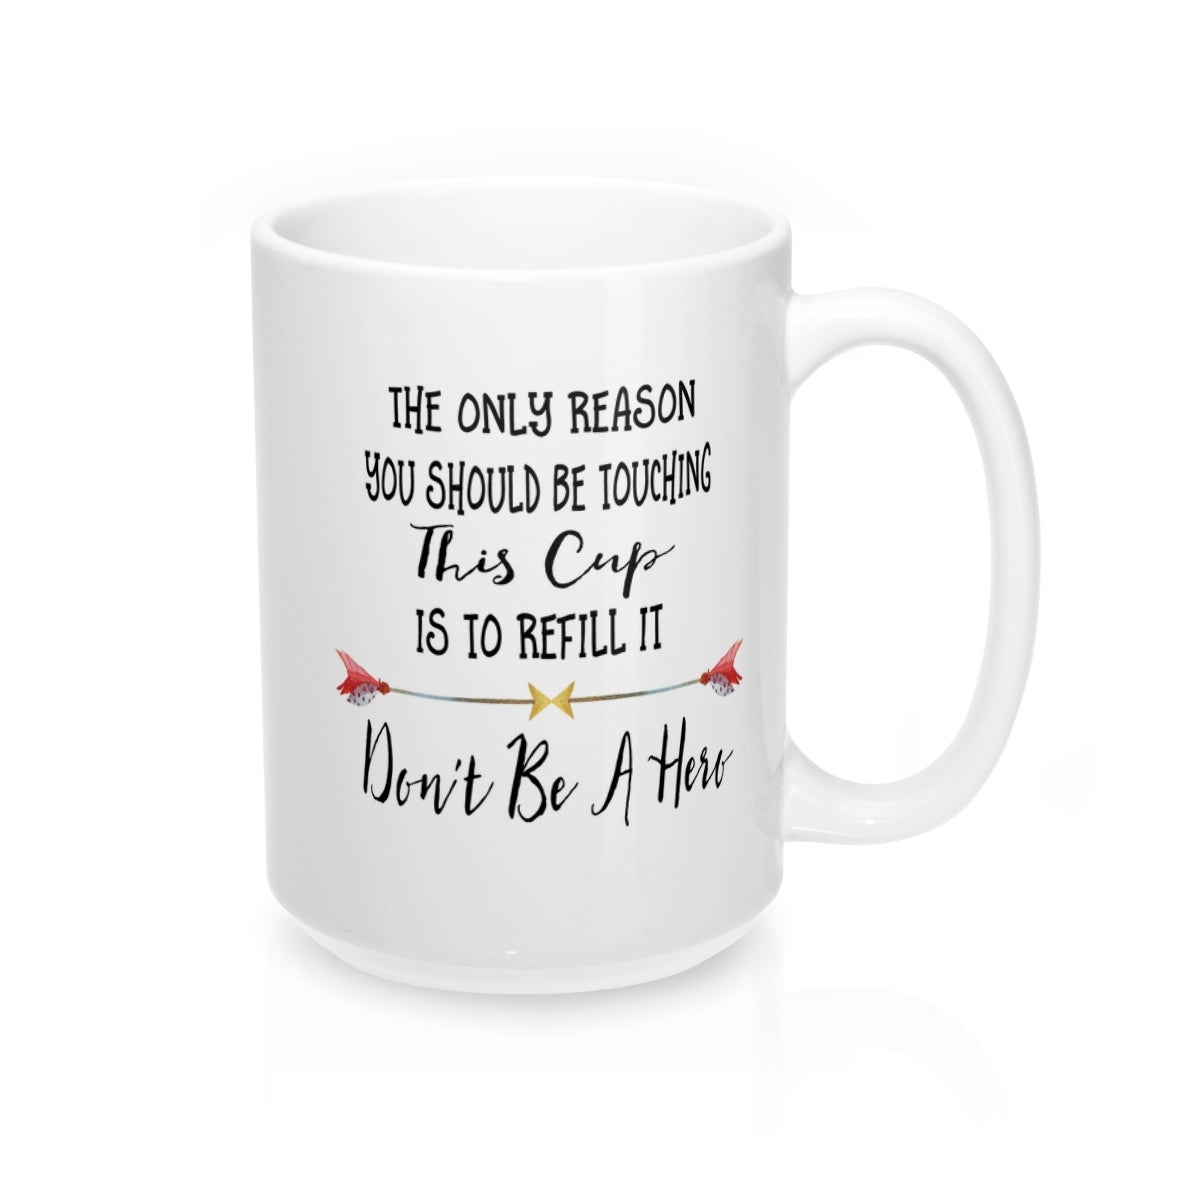 Mug Don't be a hero - elrileygifts